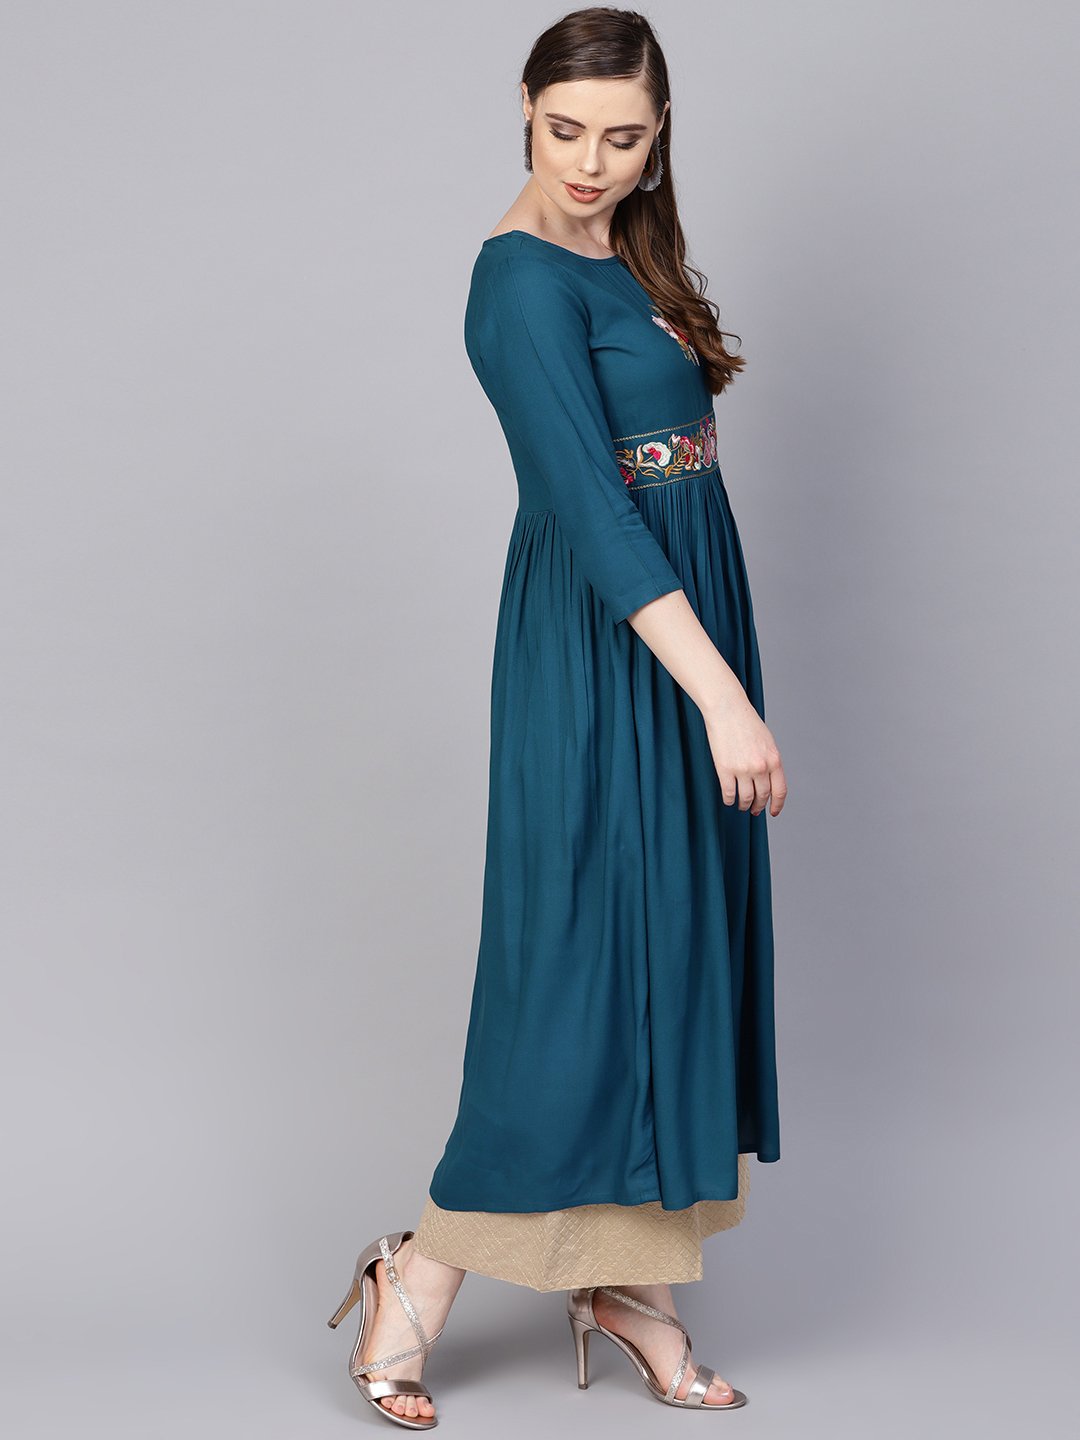 Women's Rayon Teal Blue Embroidered Kurta With Round Neck & 3/4 Sleeves - Nayo Clothing